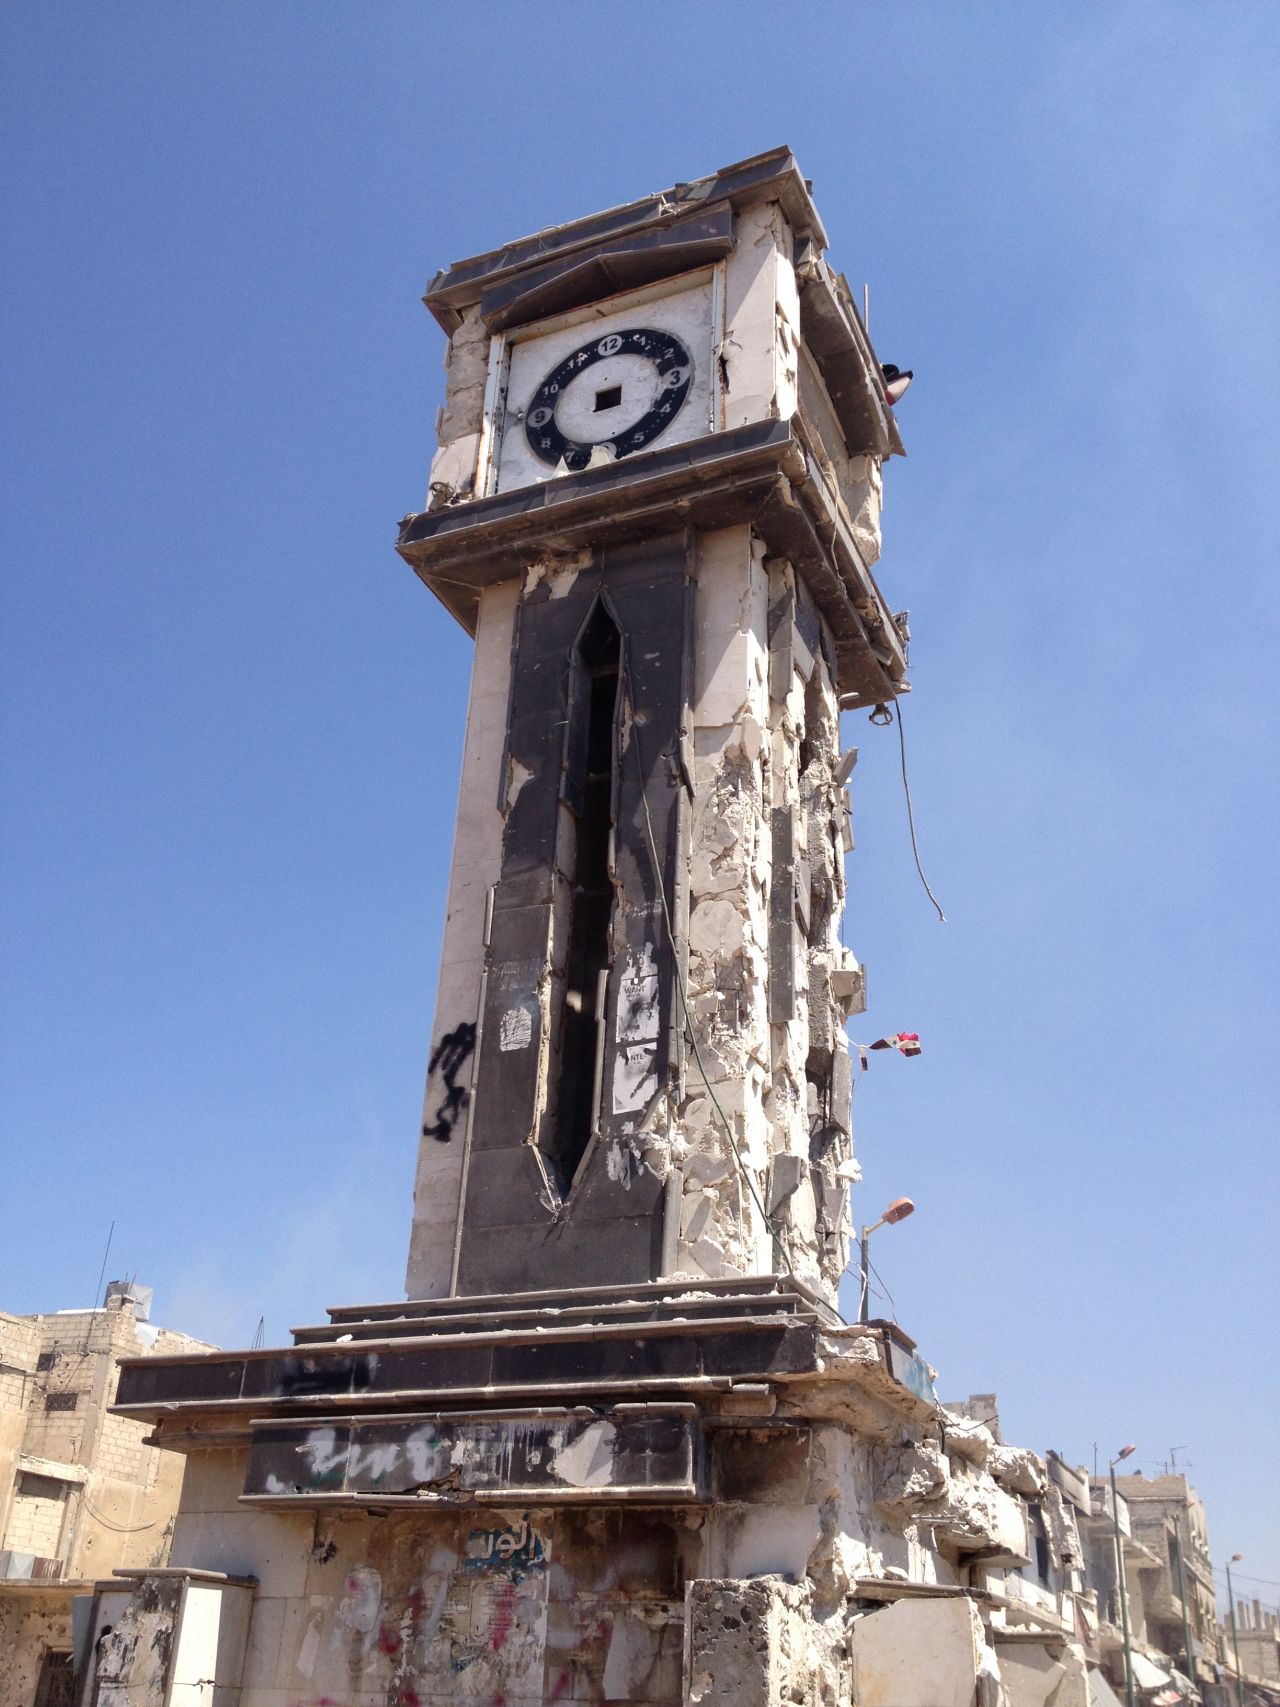 The iconic clock tower in the city's central square was also destroyed.